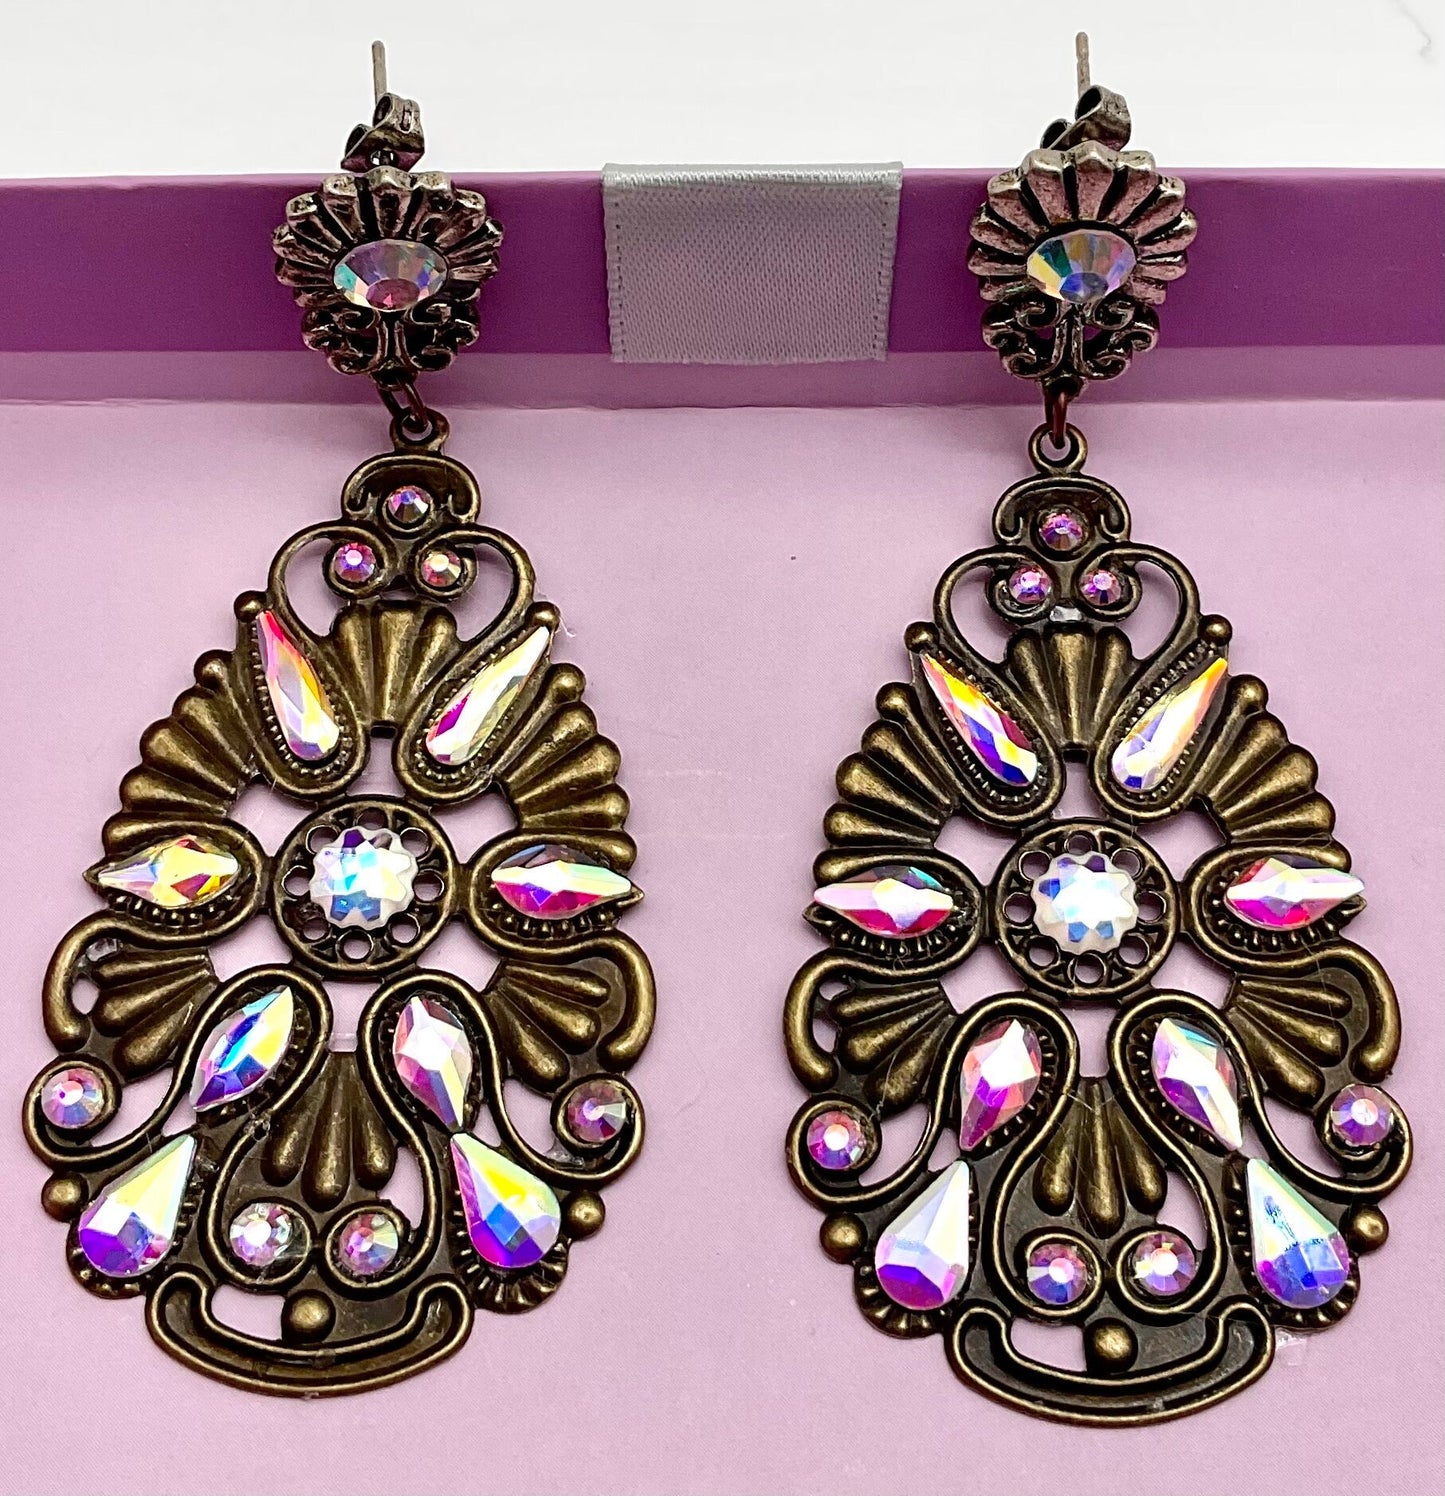 Brass Floral Tear Drop Shaped Dangle Earrings with AB Crystal Accents